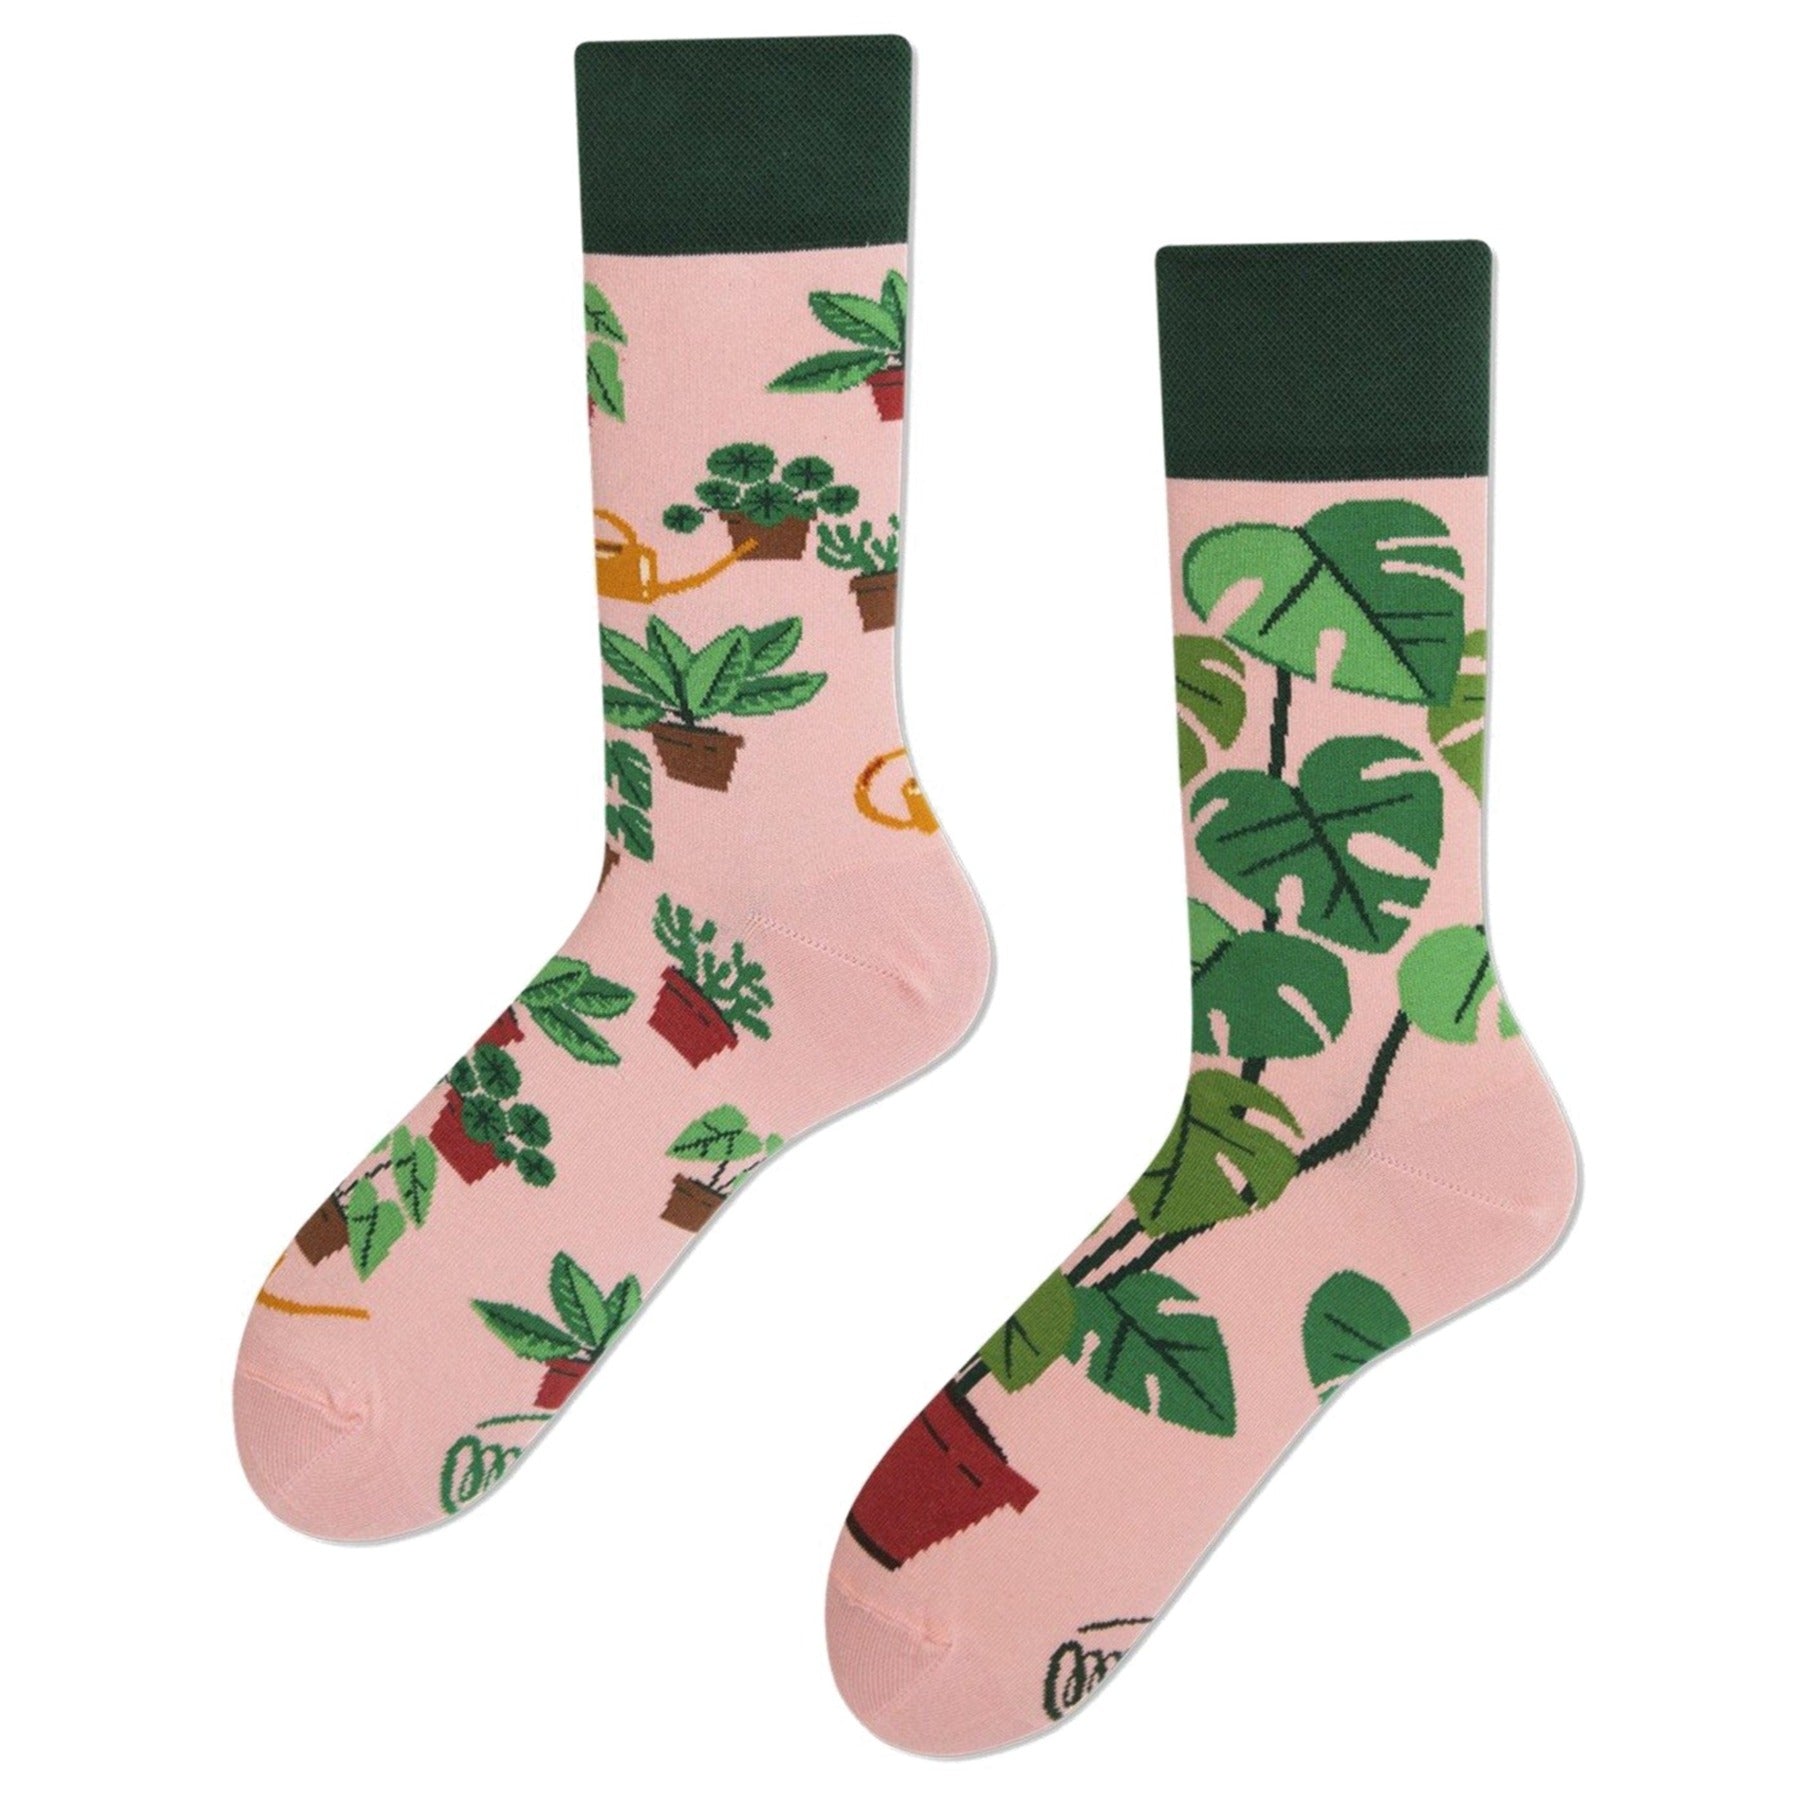 Shown in a flatlay, these pink cotton mis-matched women's crew socks with a green cuff by the brand Many Mornings feature beautiful potted Monstera plants and succulents all over the foot and leg.